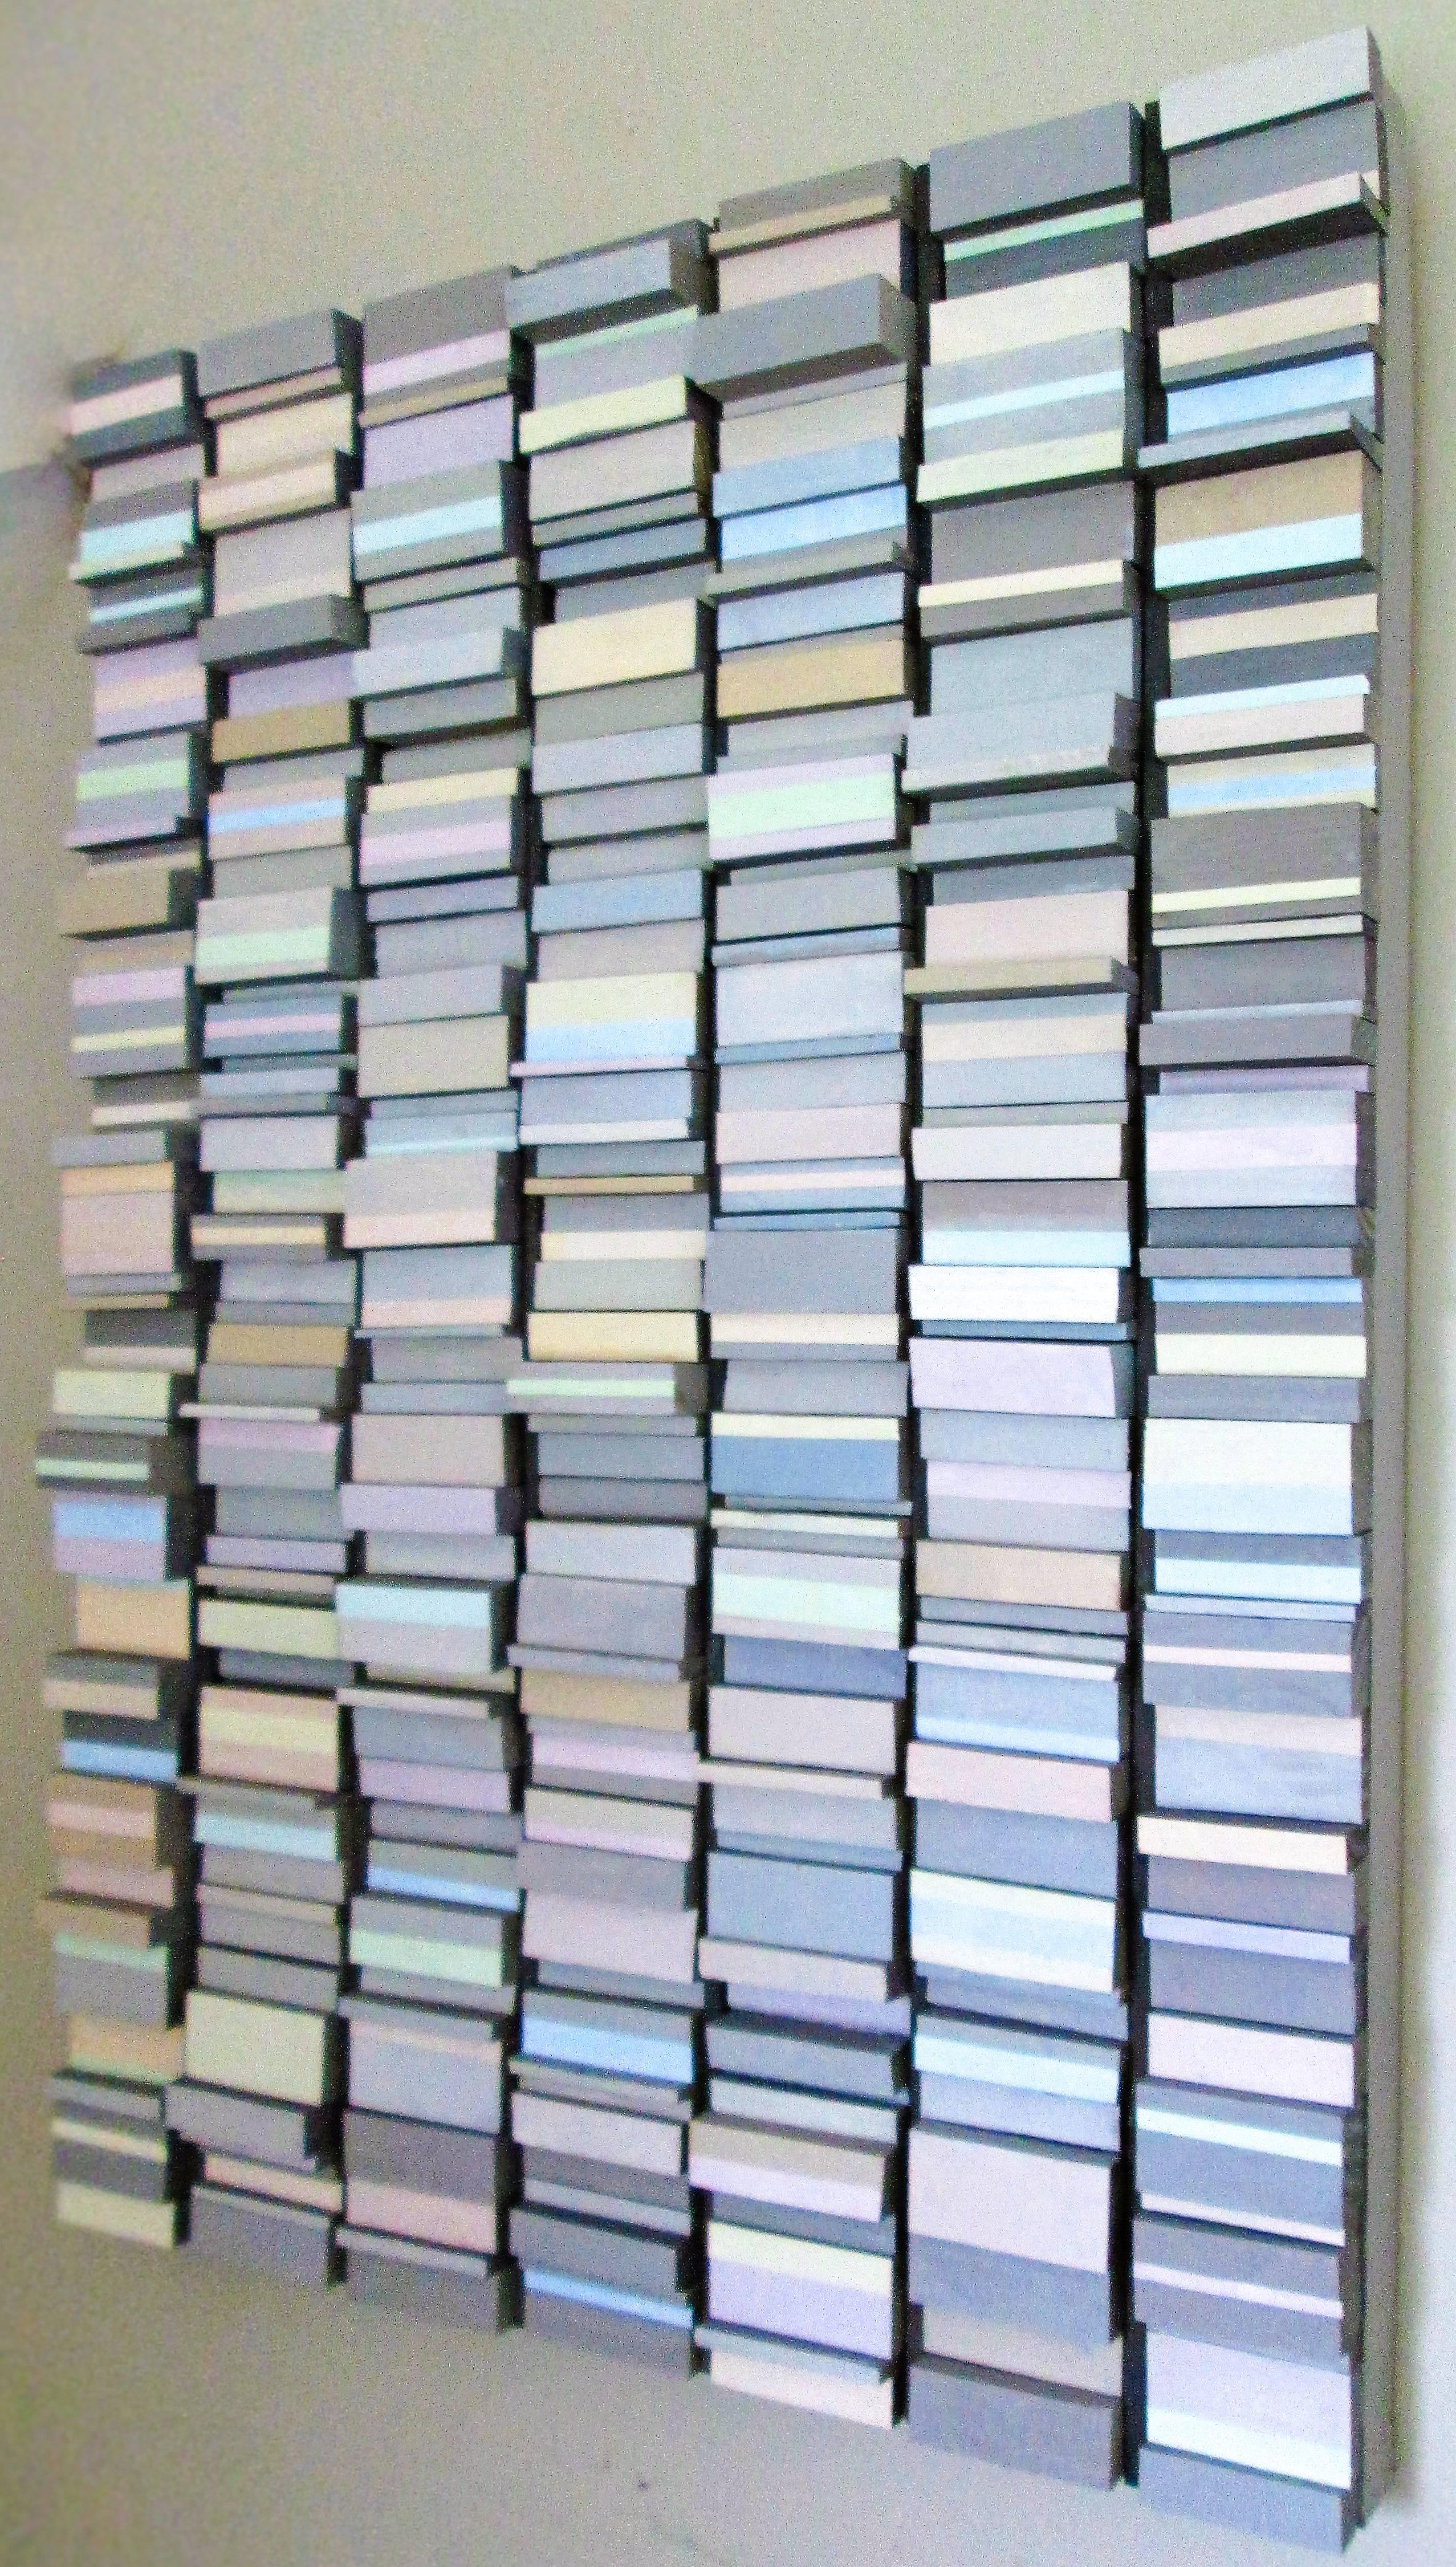 All in a Row (Pastel & Gray 3 Dimensional Wall Sculpture) - Painting by Stephen Walling